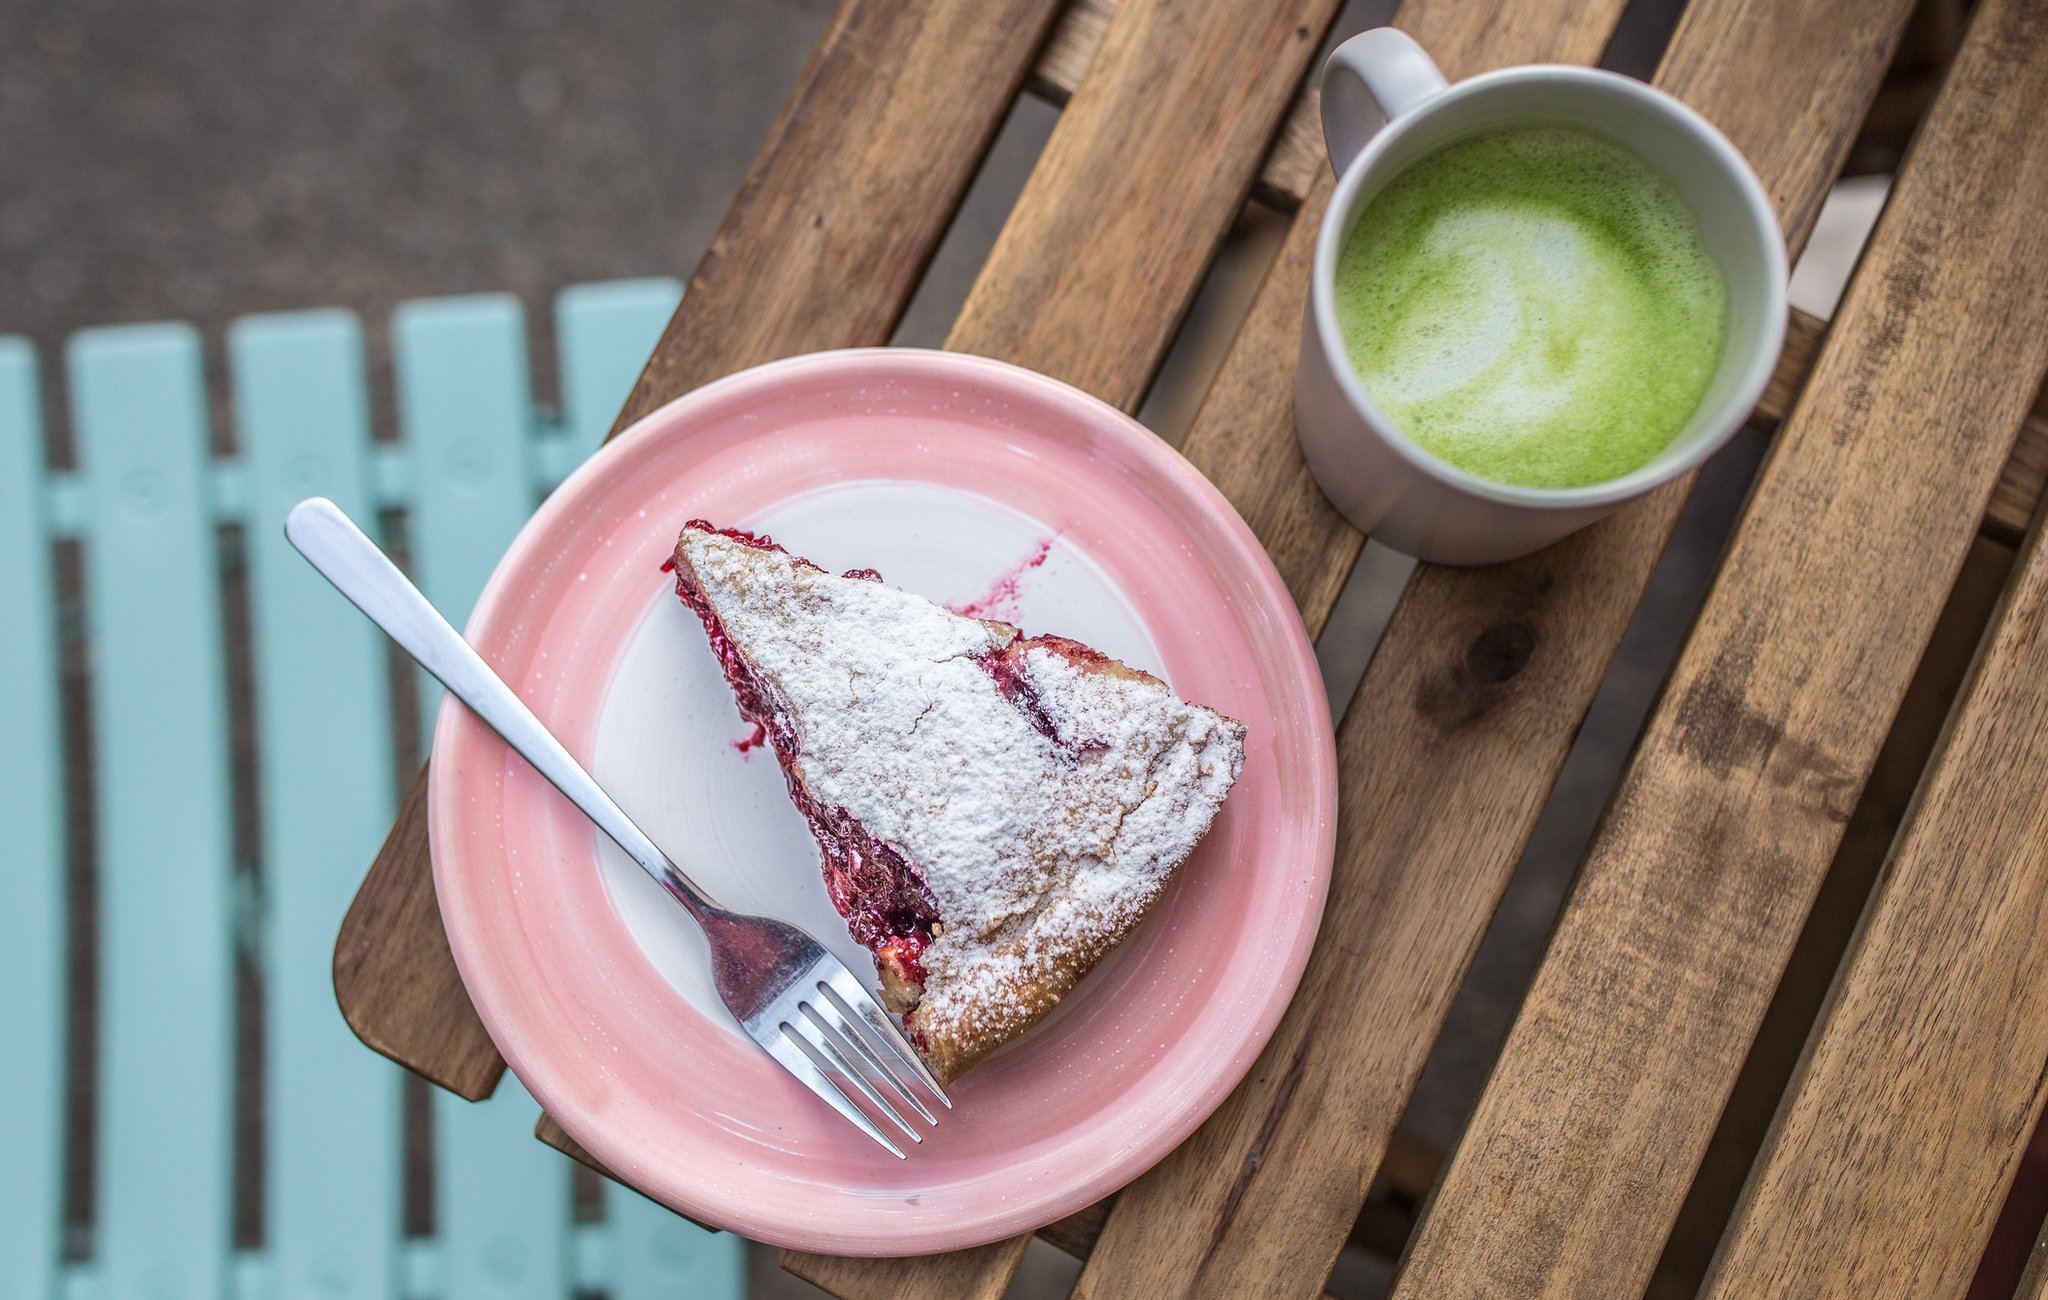 A cherry pie on a pink plate with a fork, and a cup of matcha latte, on a wooden table - photo is taken from above